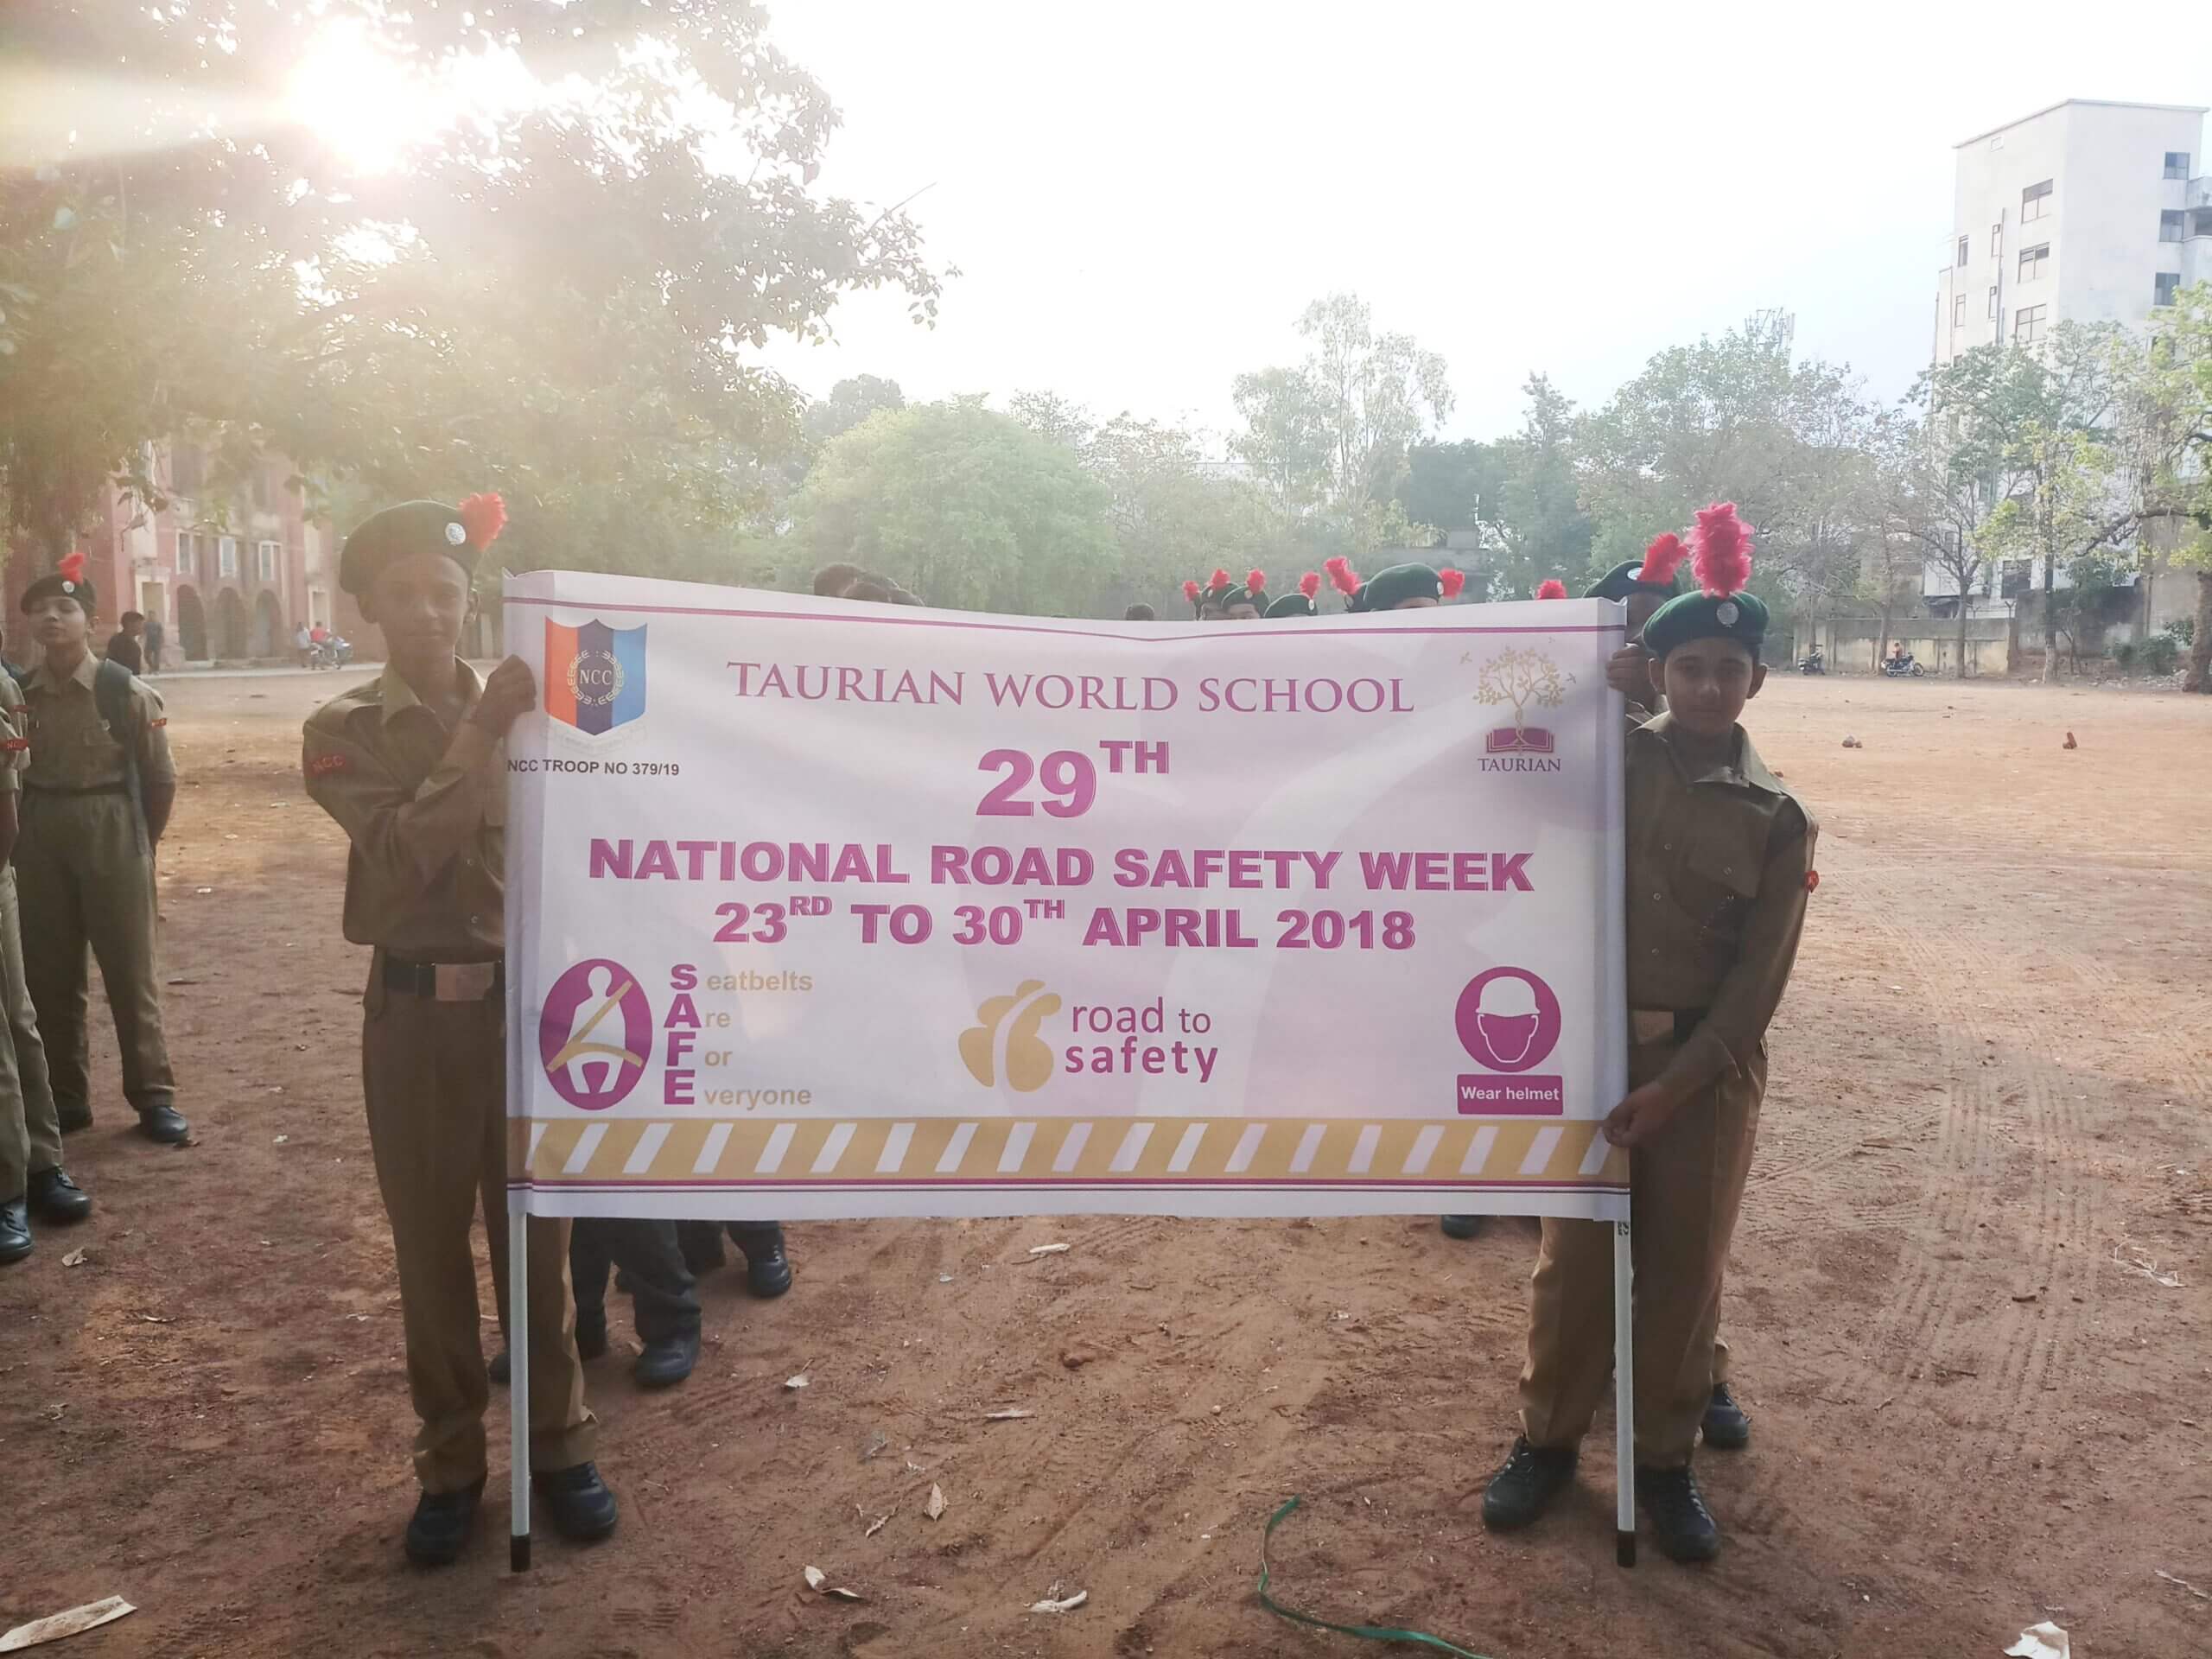 Road Safety Campaign attended by Our NCC and Band Students on 30th April 2018